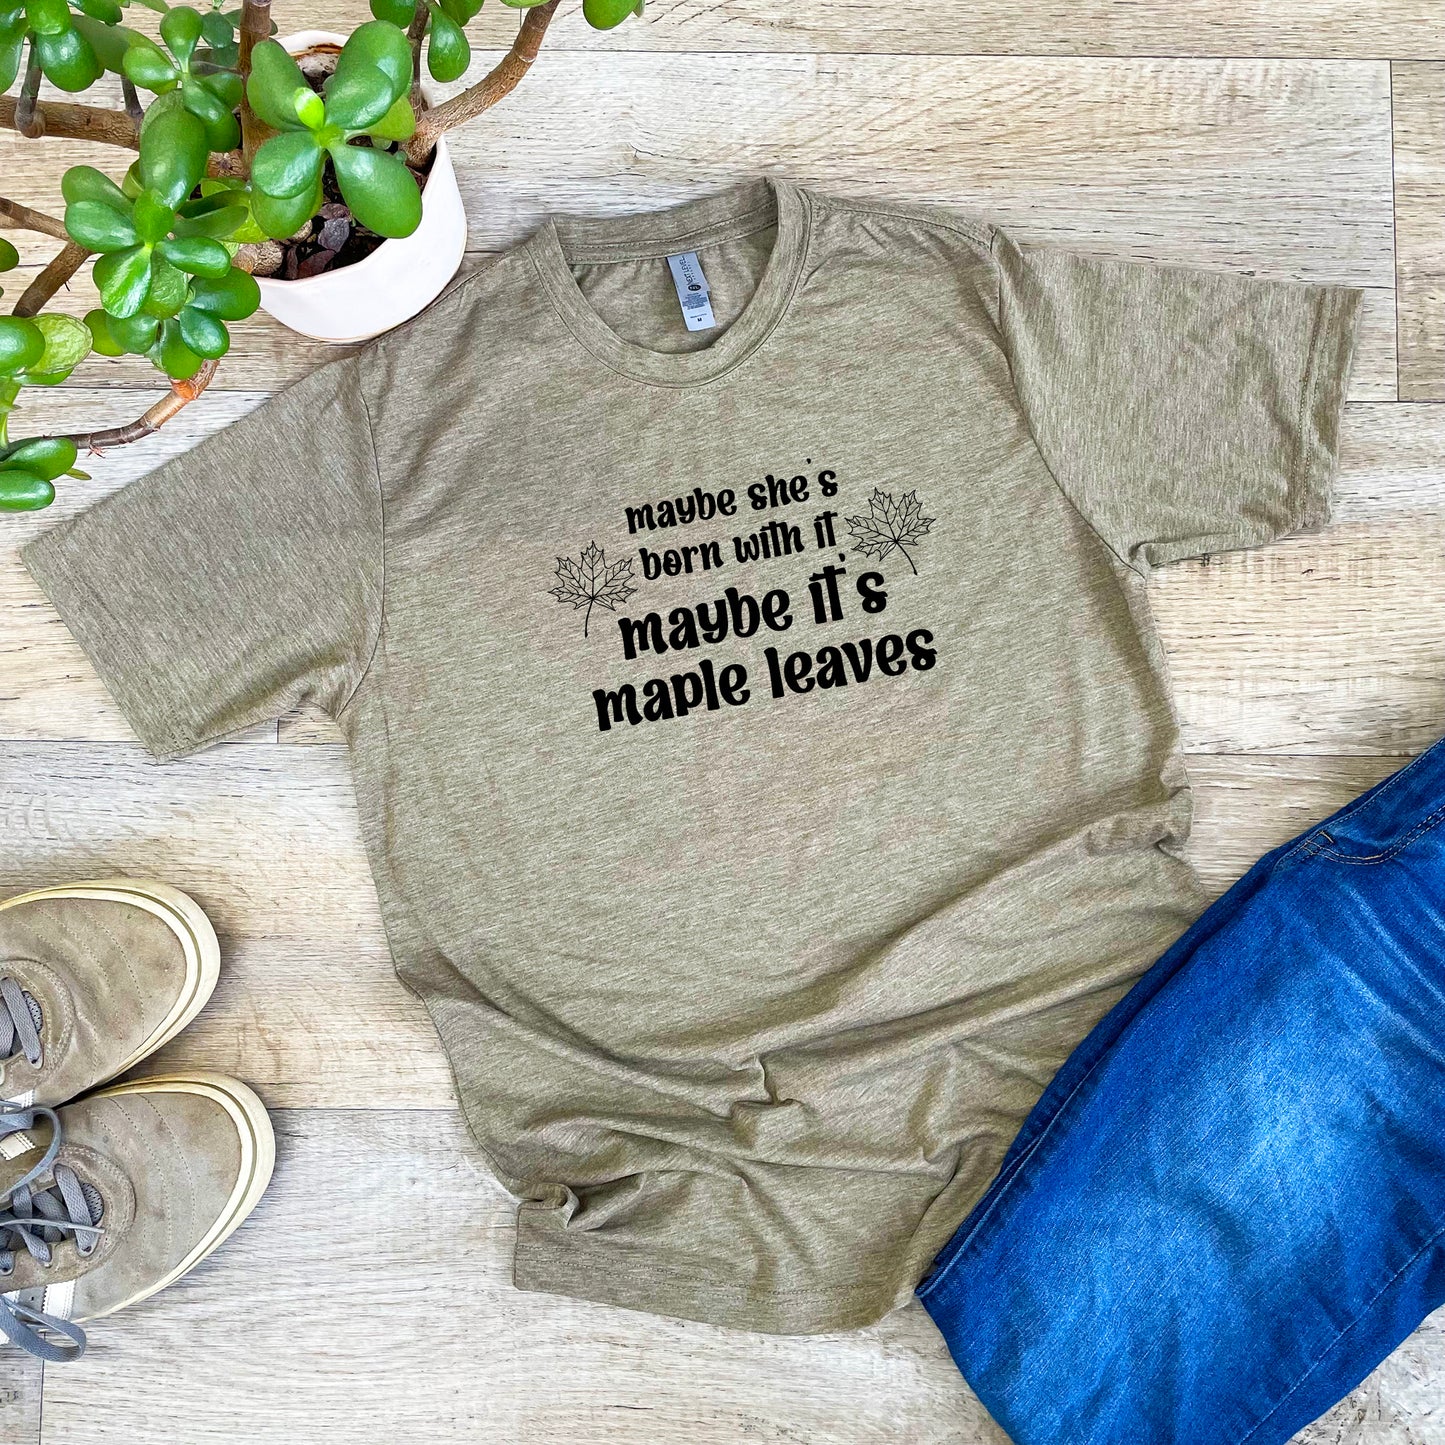 Maybe She's Born With It, Maybe It's Maple Leaves - Men's / Unisex Tee - Stonewash Blue or Sage